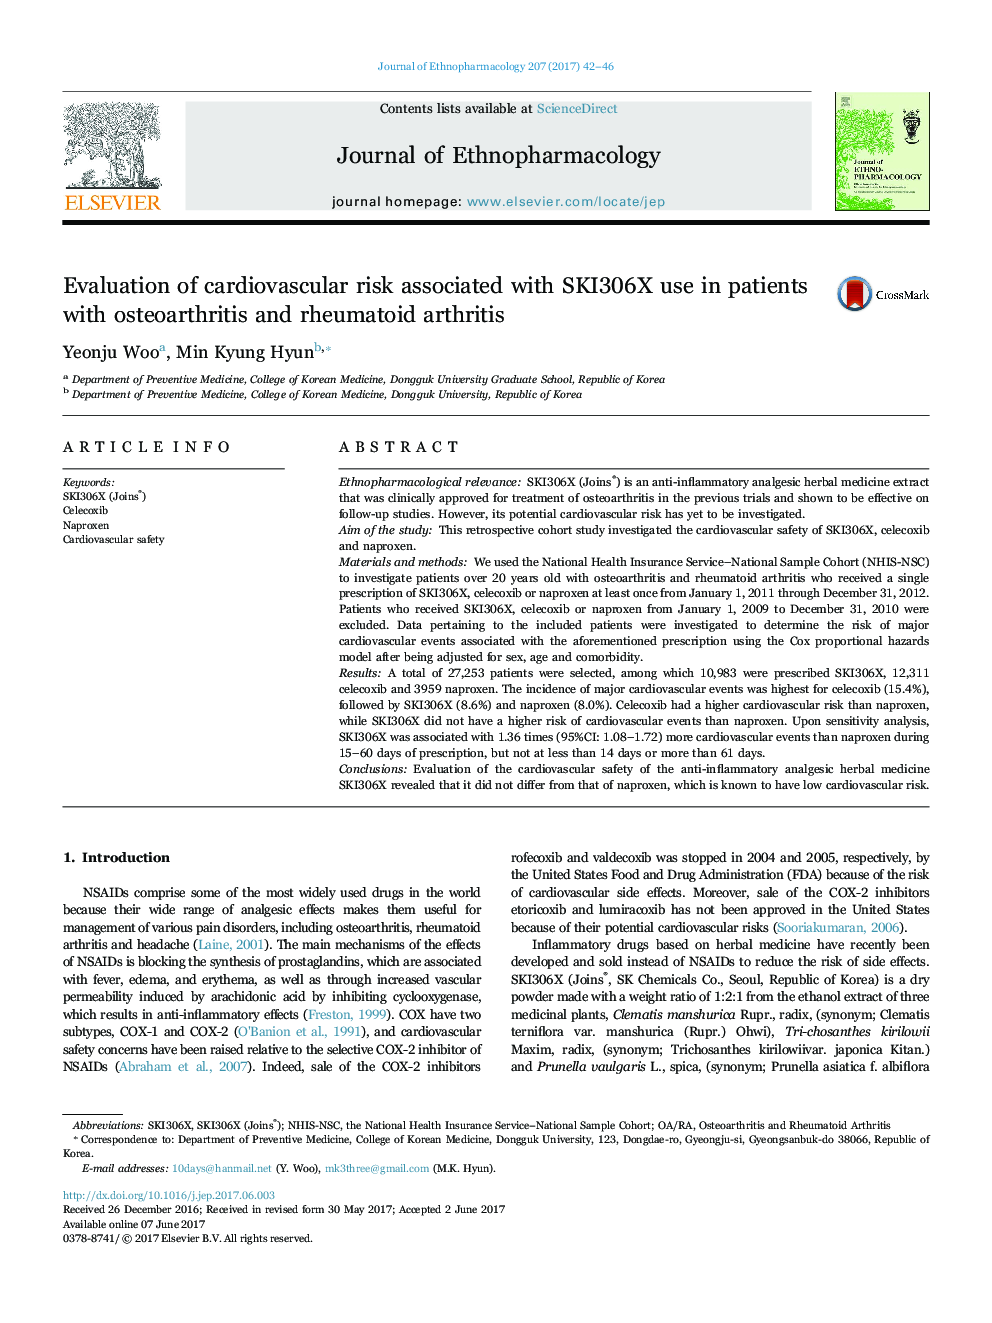 Evaluation of cardiovascular risk associated with SKI306X use in patients with osteoarthritis and rheumatoid arthritis